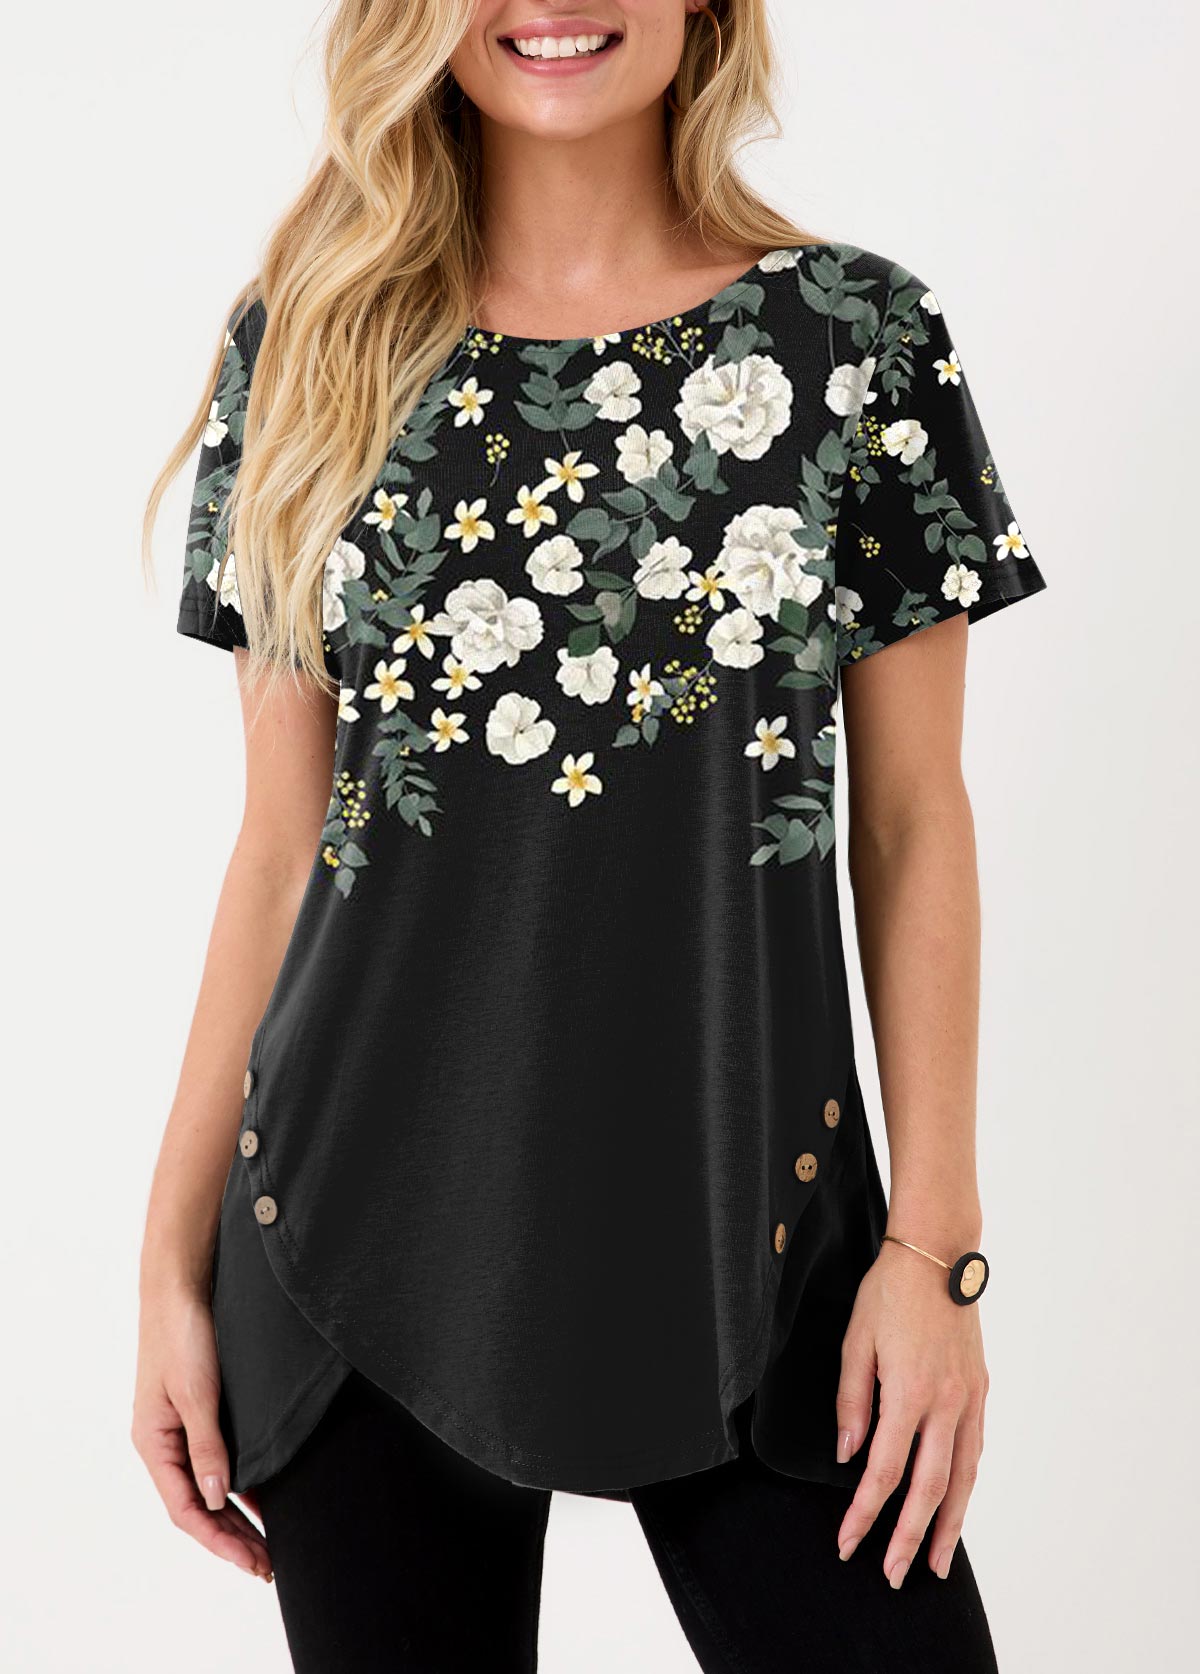 Black Floral Print Inclined Button T Shirt